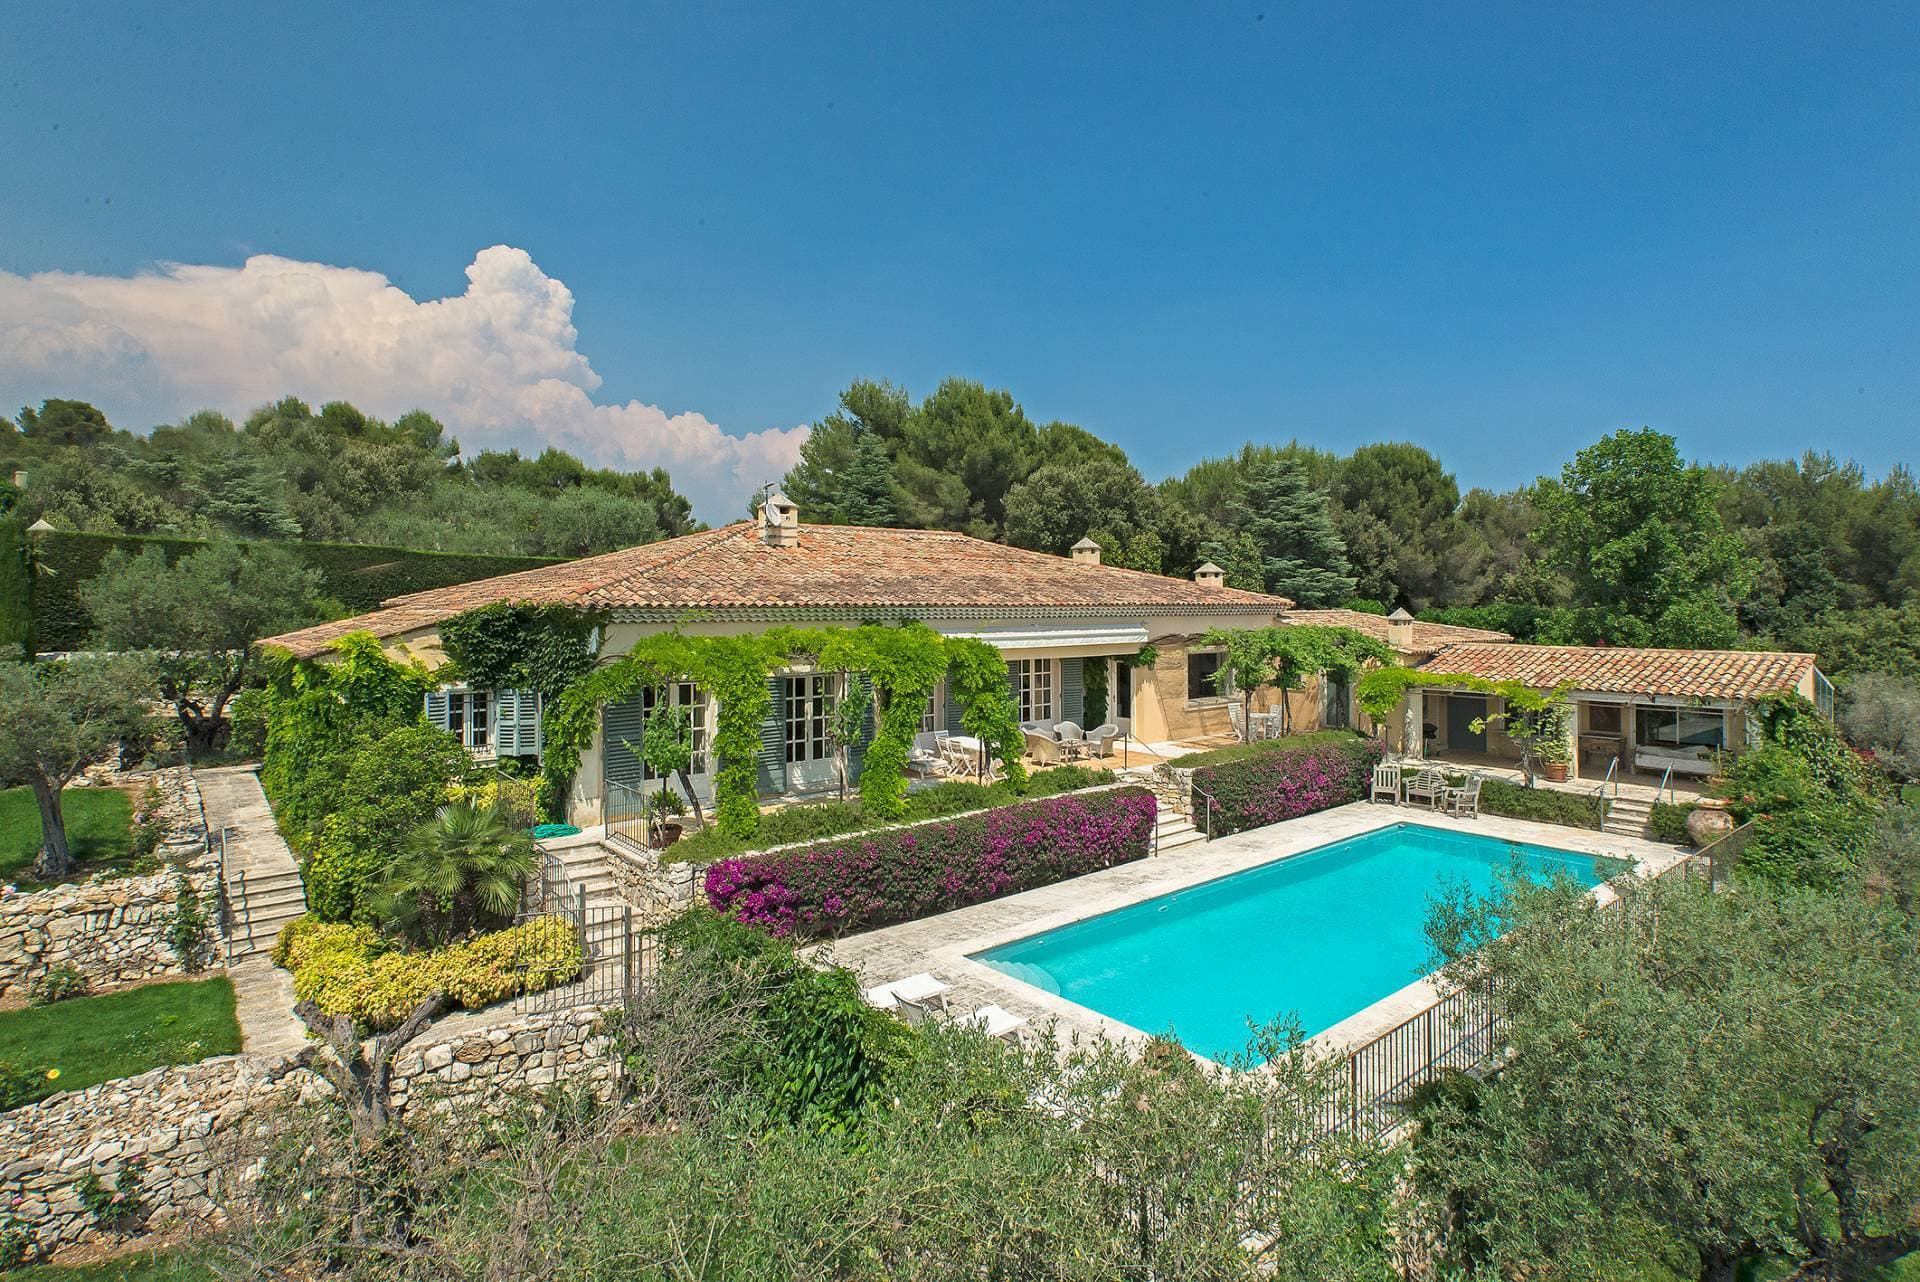 French holiday home - Is now a good time to buy? 1